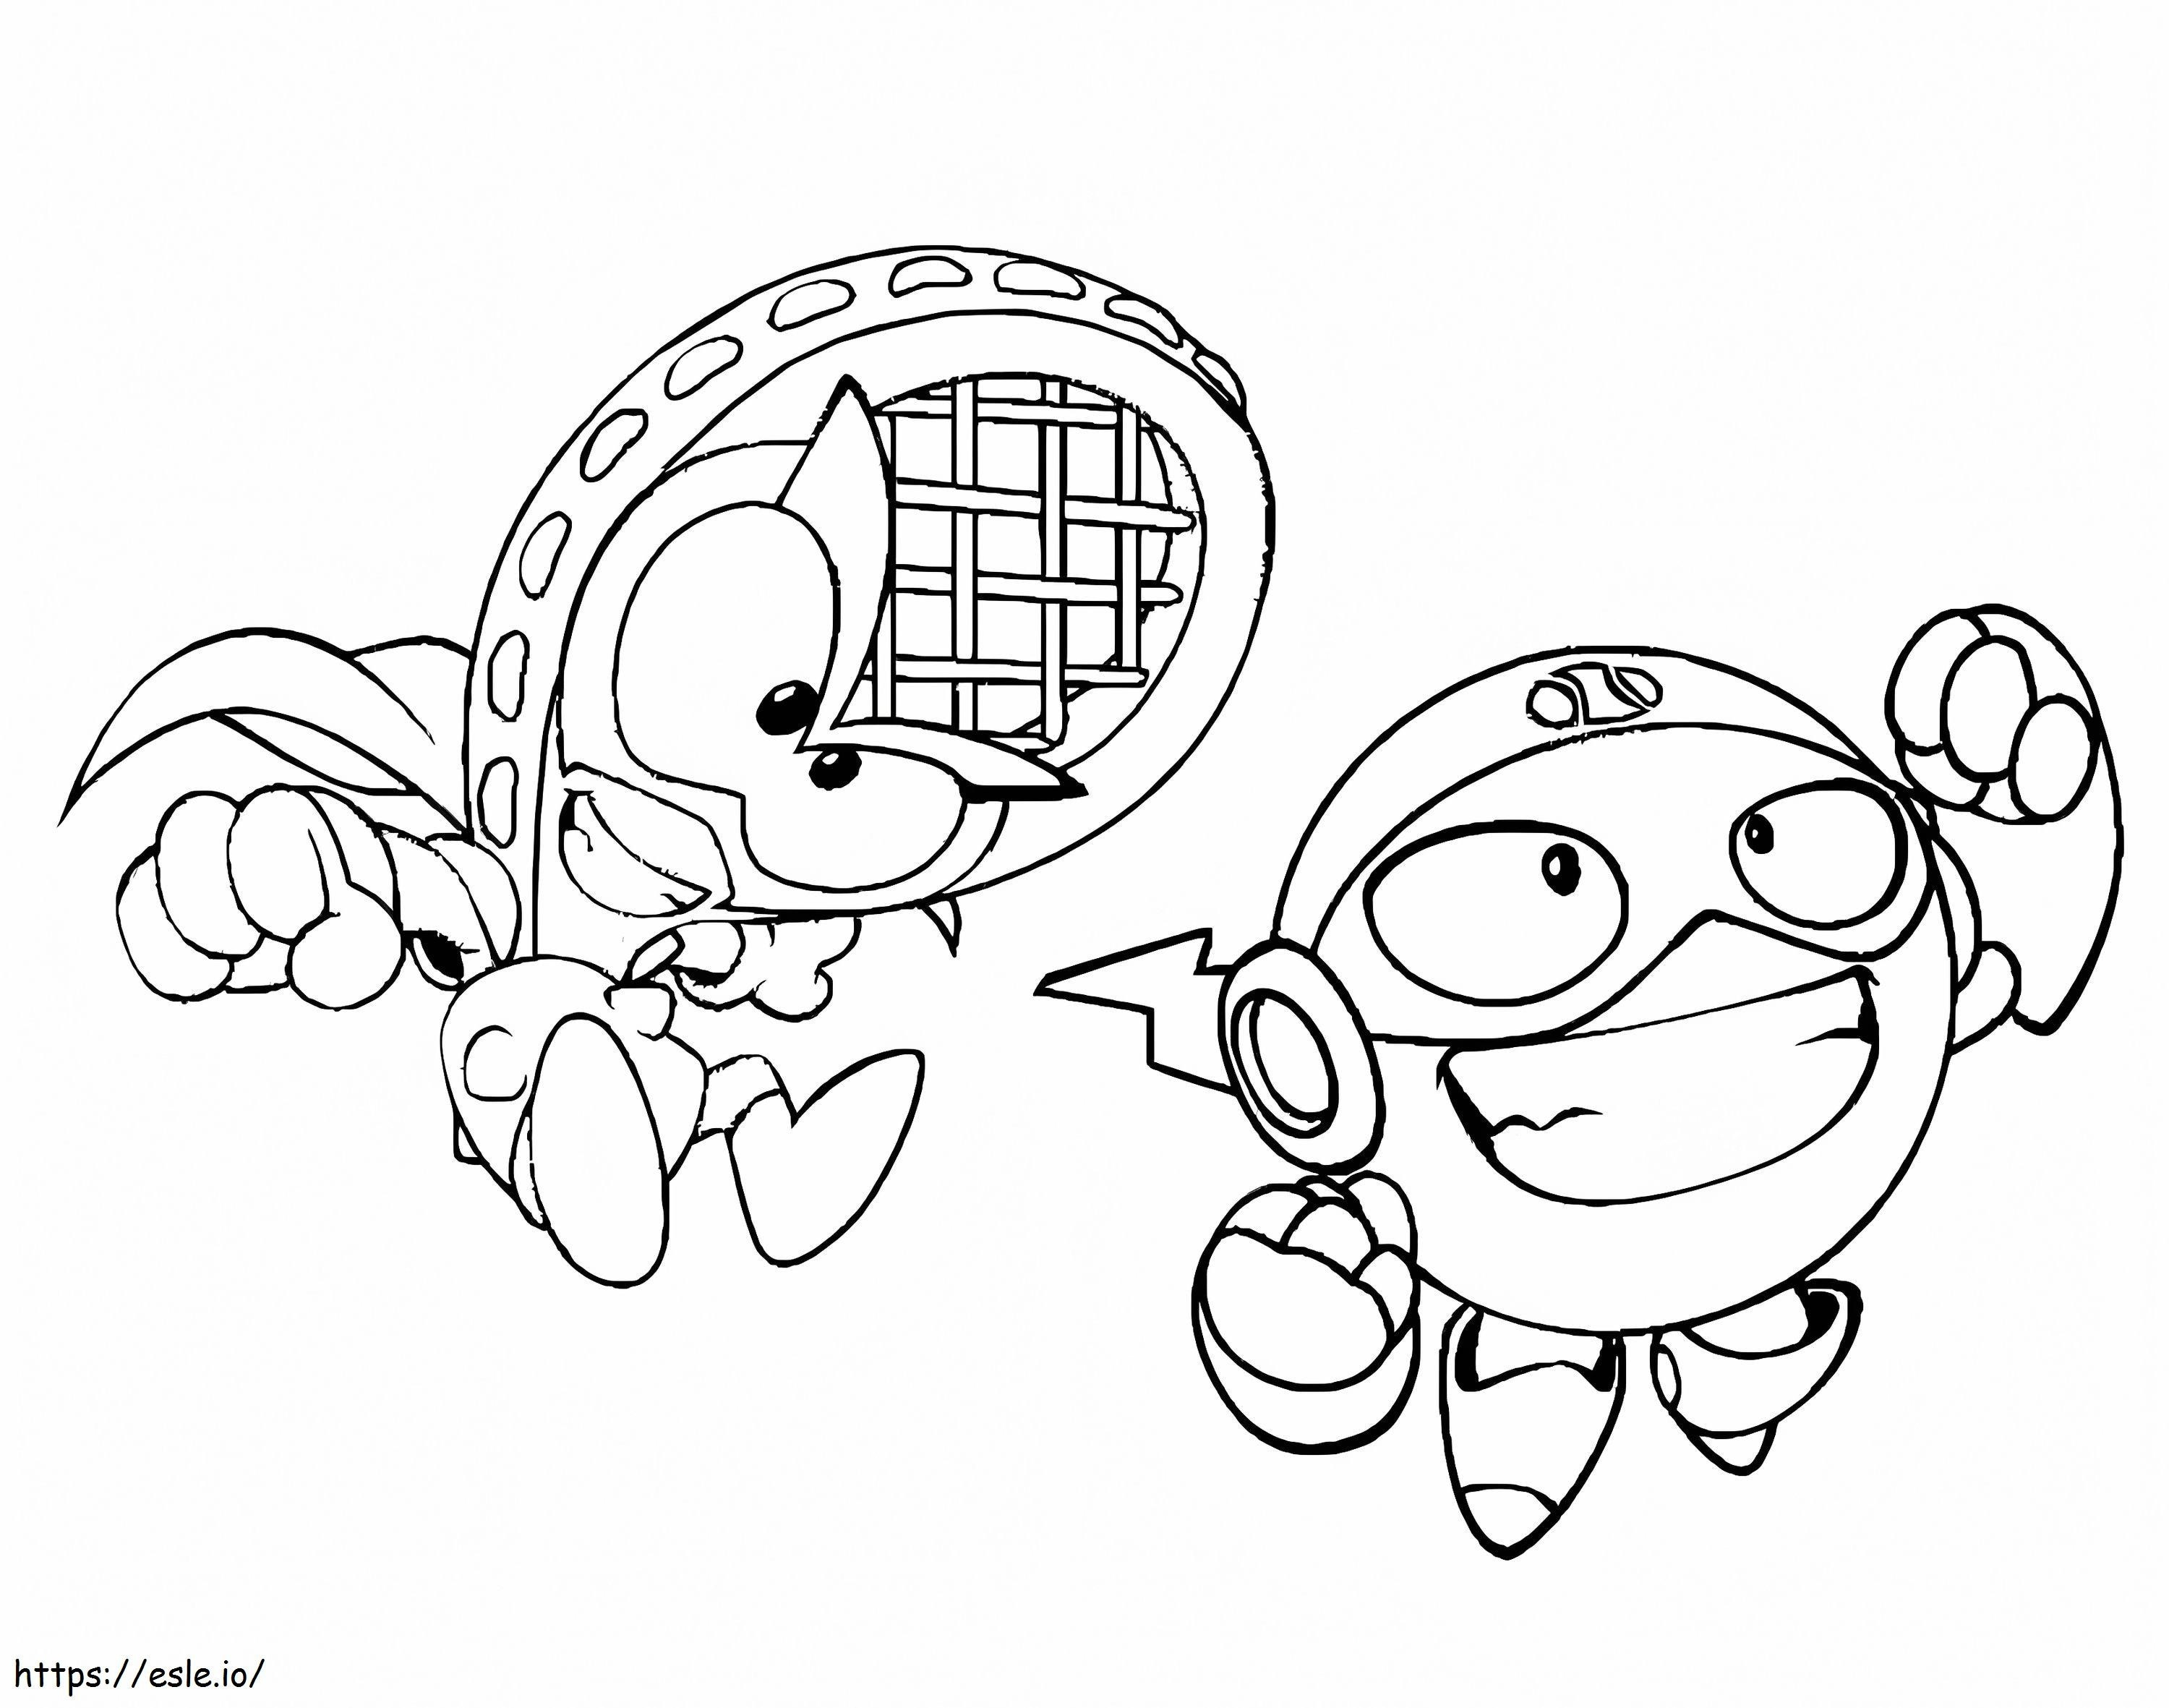 Ace And Smash Superzings coloring page